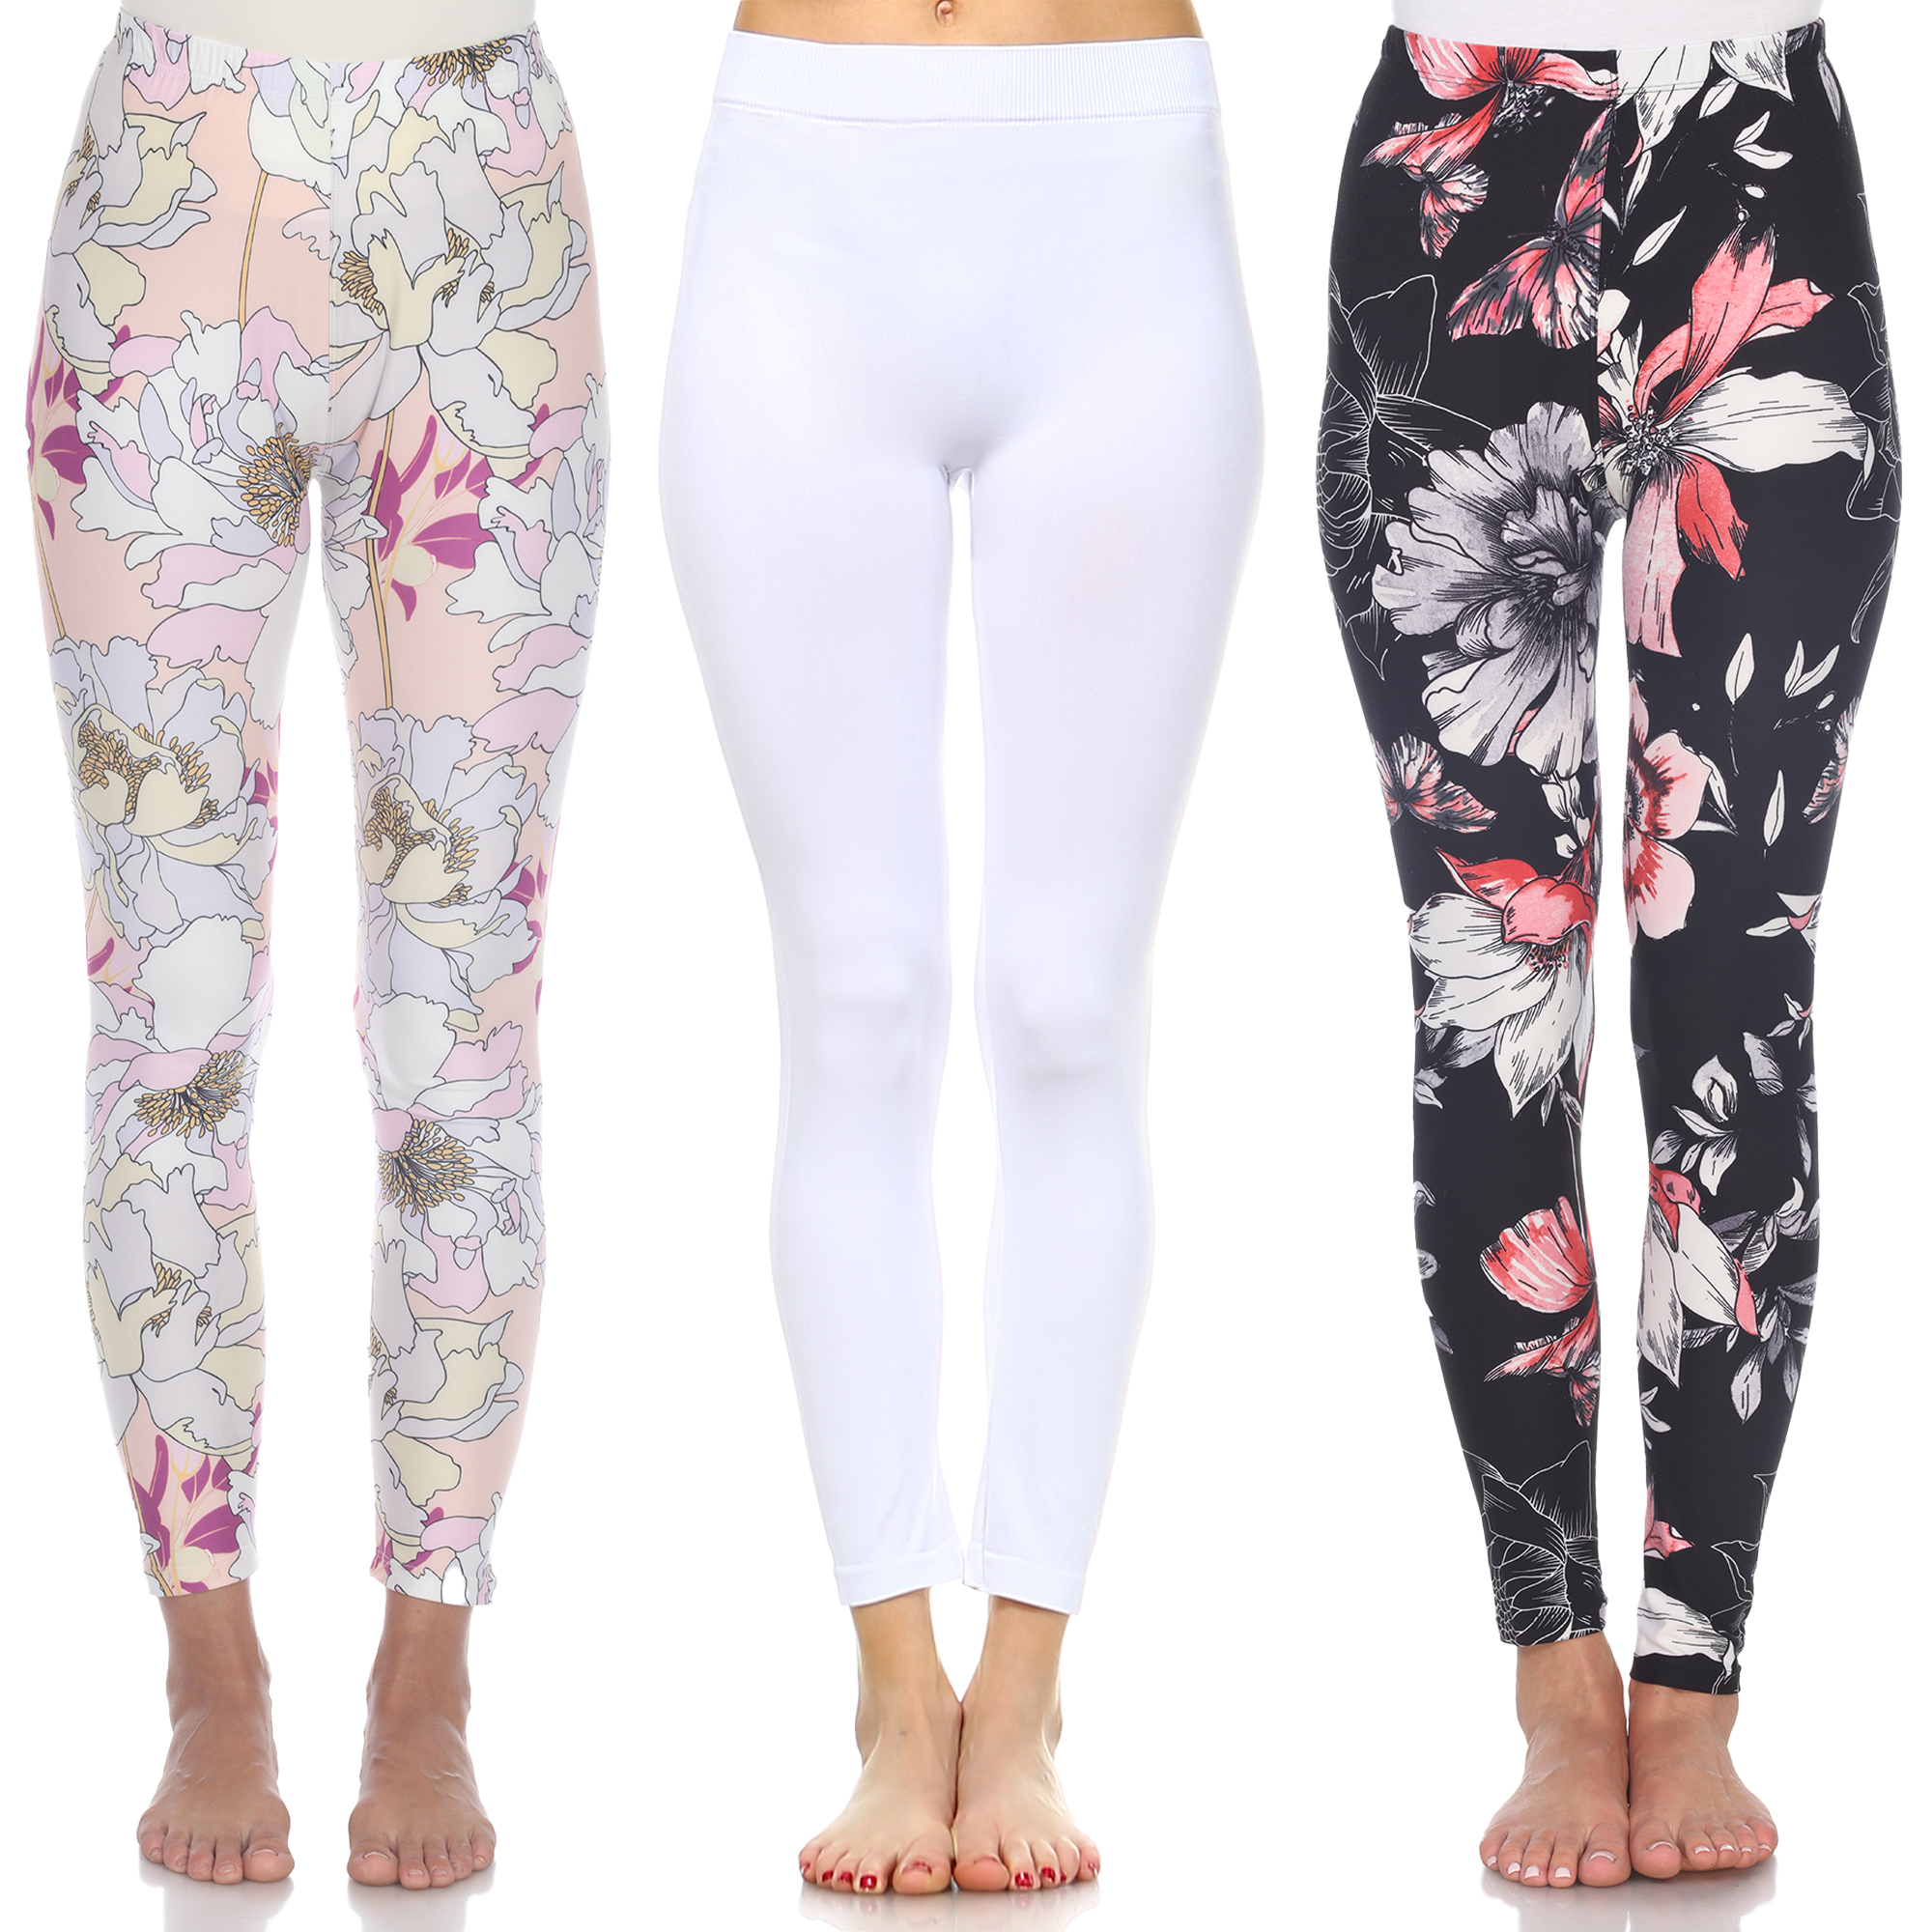 White Mark Women's Pack Of 3 Printed Leggings - Pink, White, Coral Pink Flower, One Size - Regular